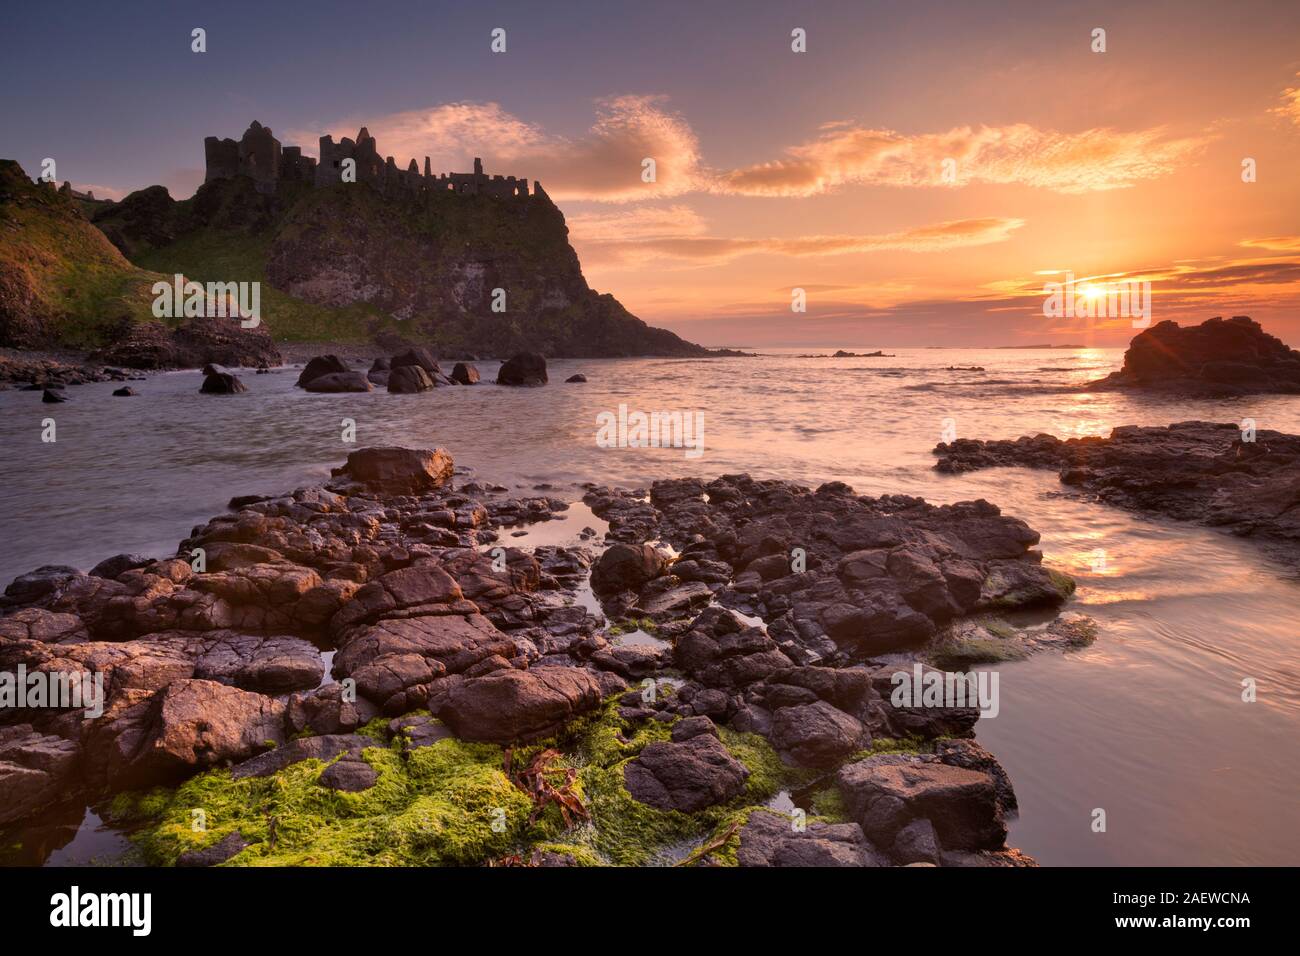 The ruins of the Dunluce Castle on the Causeway Coast of Northern Ireland. Photographed at sunset. Stock Photo